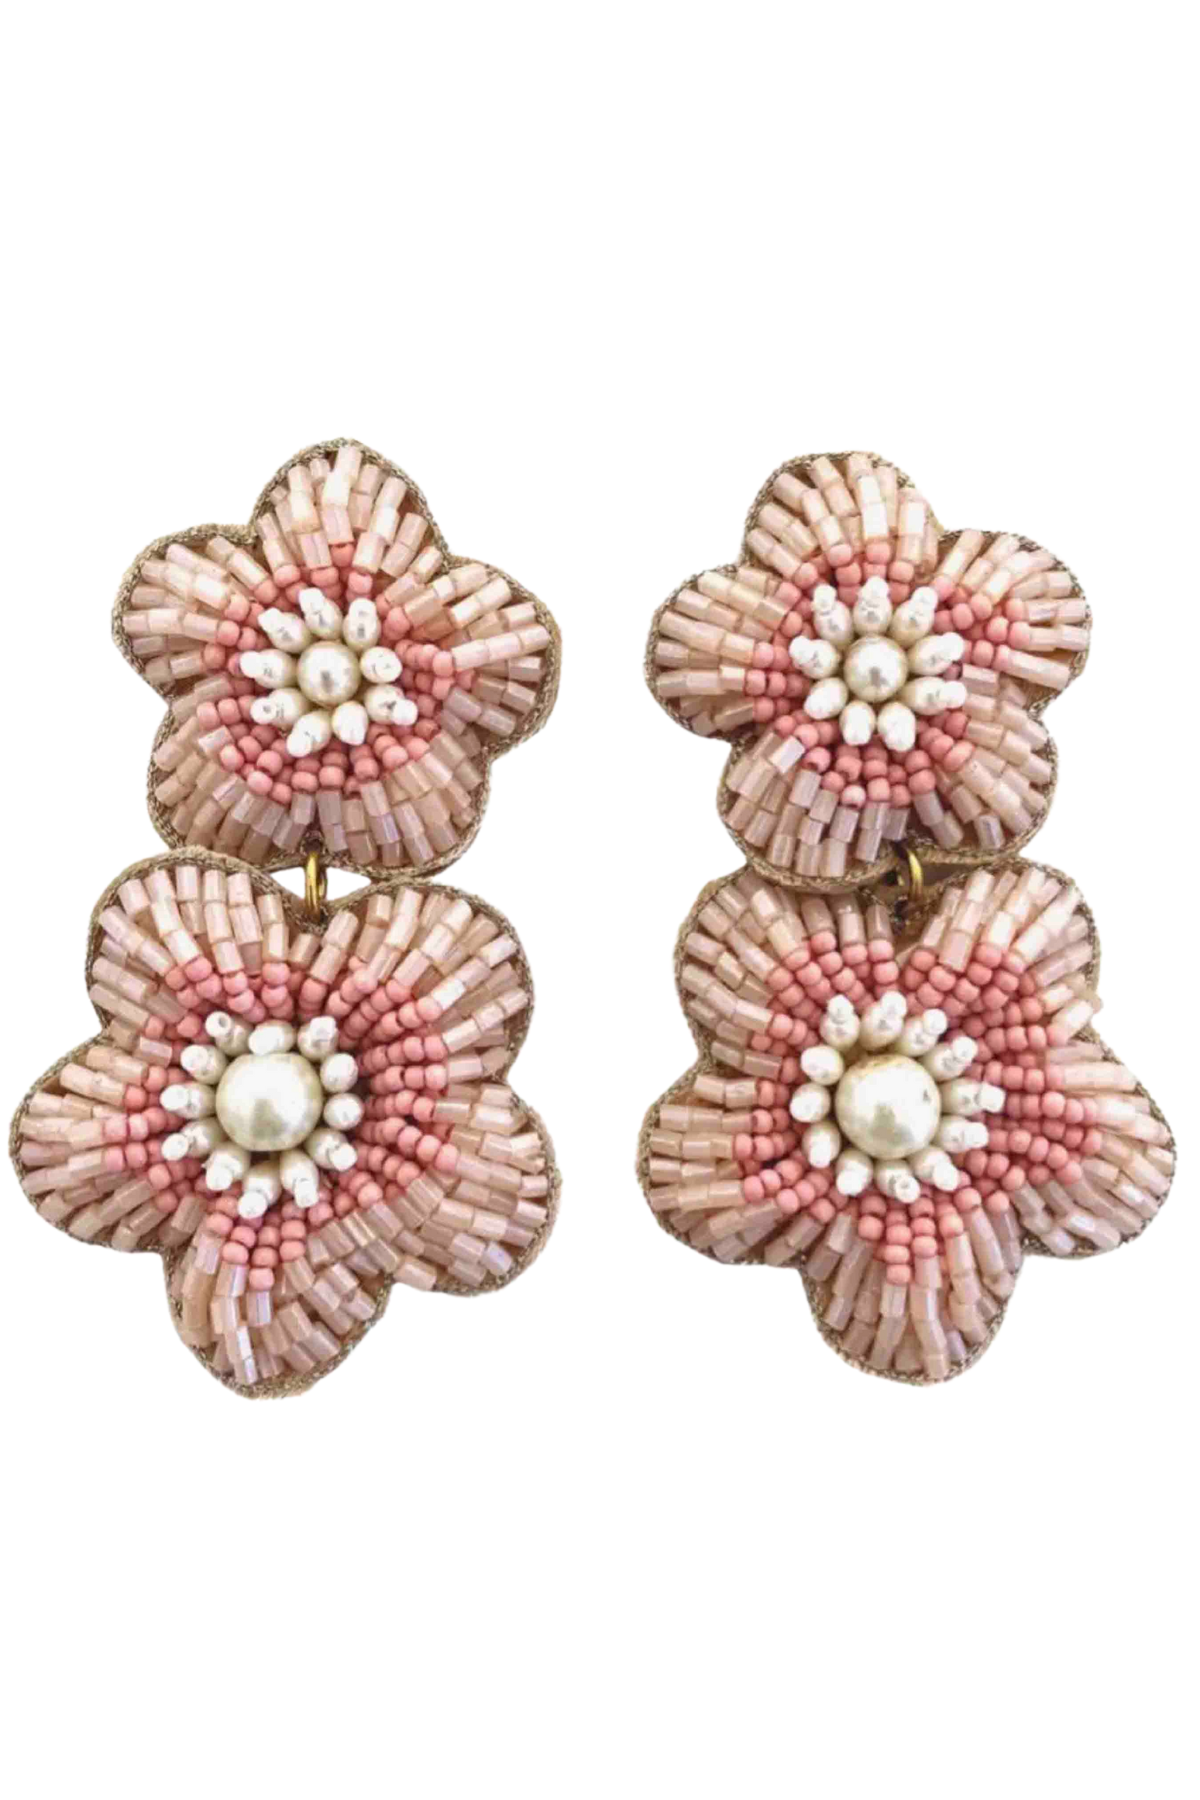 Blush Bali Double Flower Dangle Earrings by Beth Ladd Collections